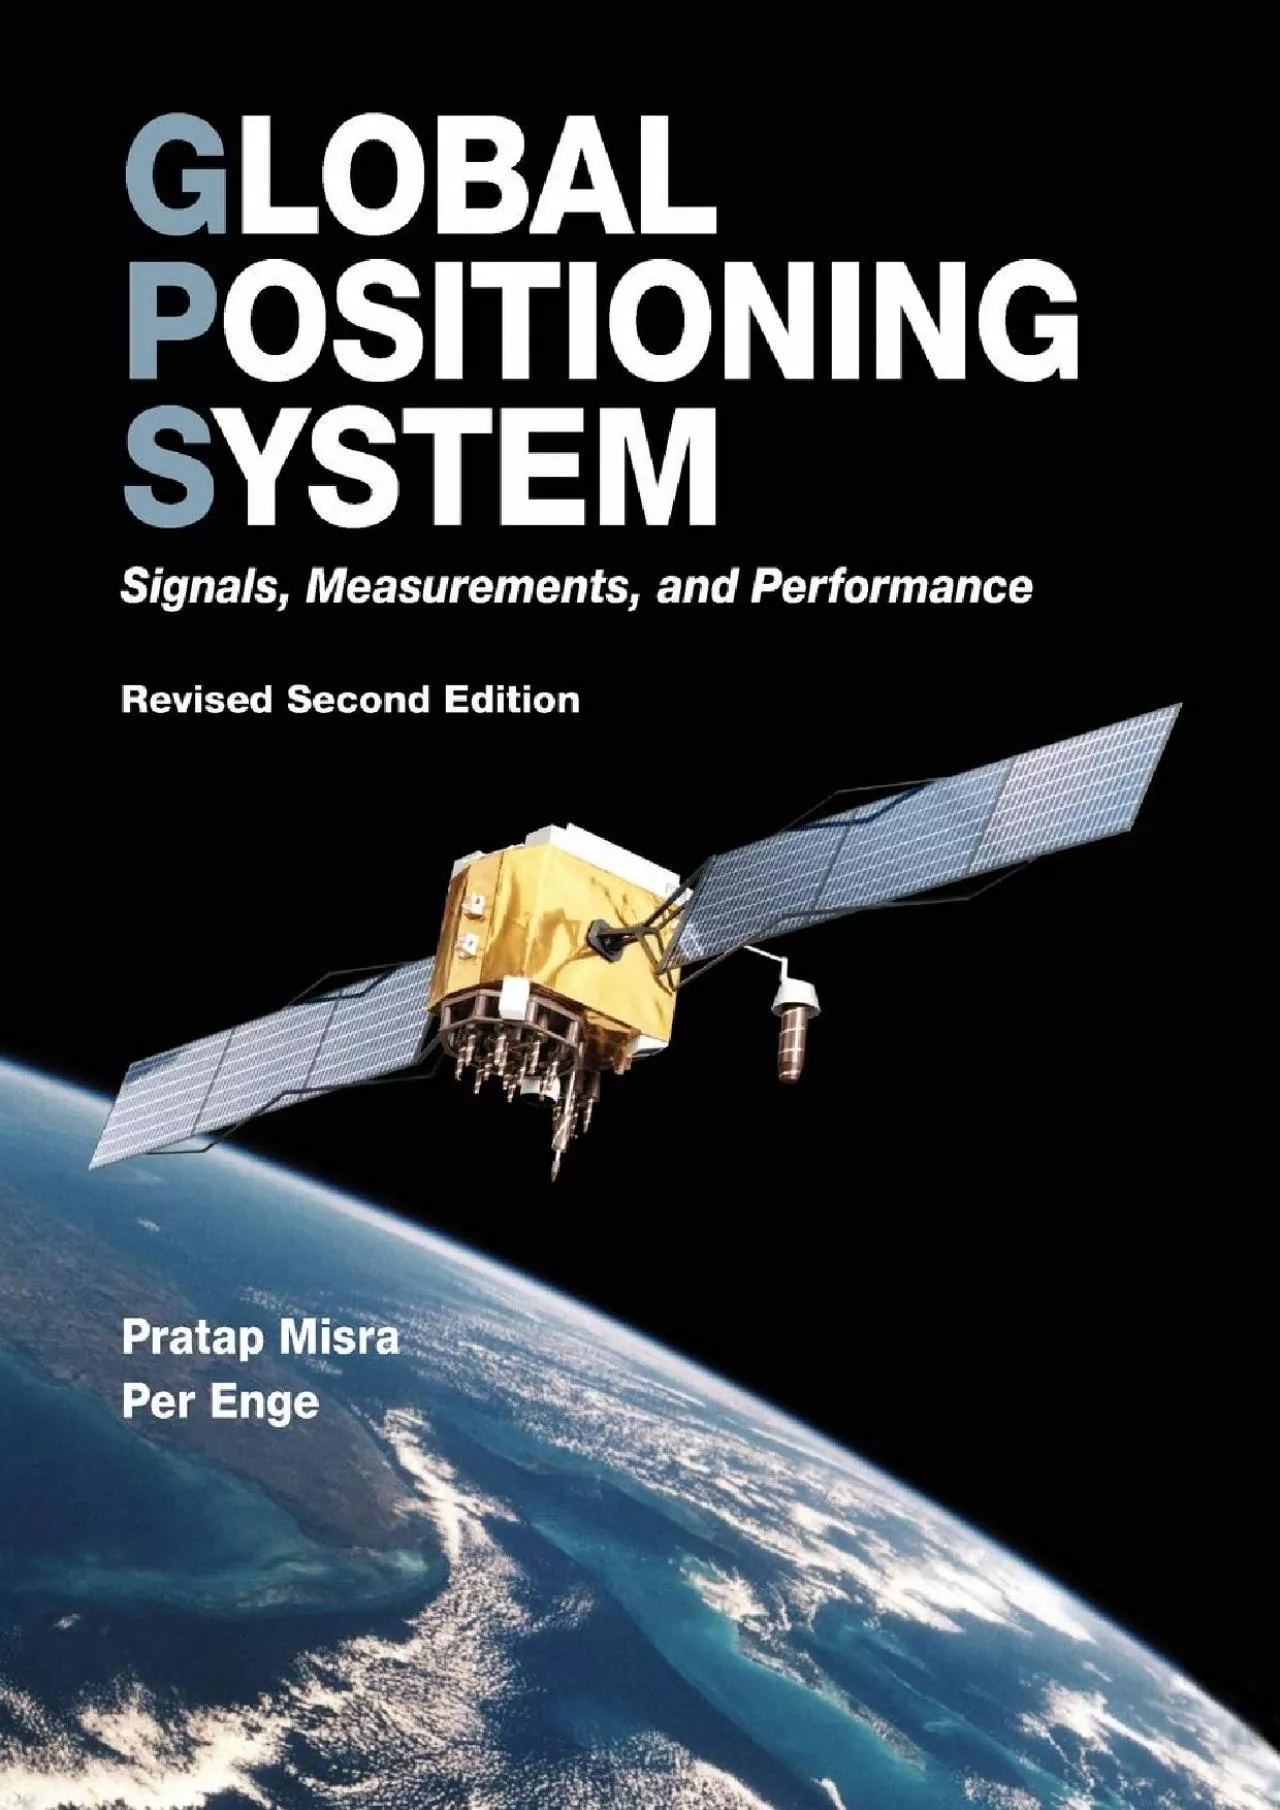 (DOWNLOAD)-Global Positioning System: Signals, Measurements, and Performance (Revised